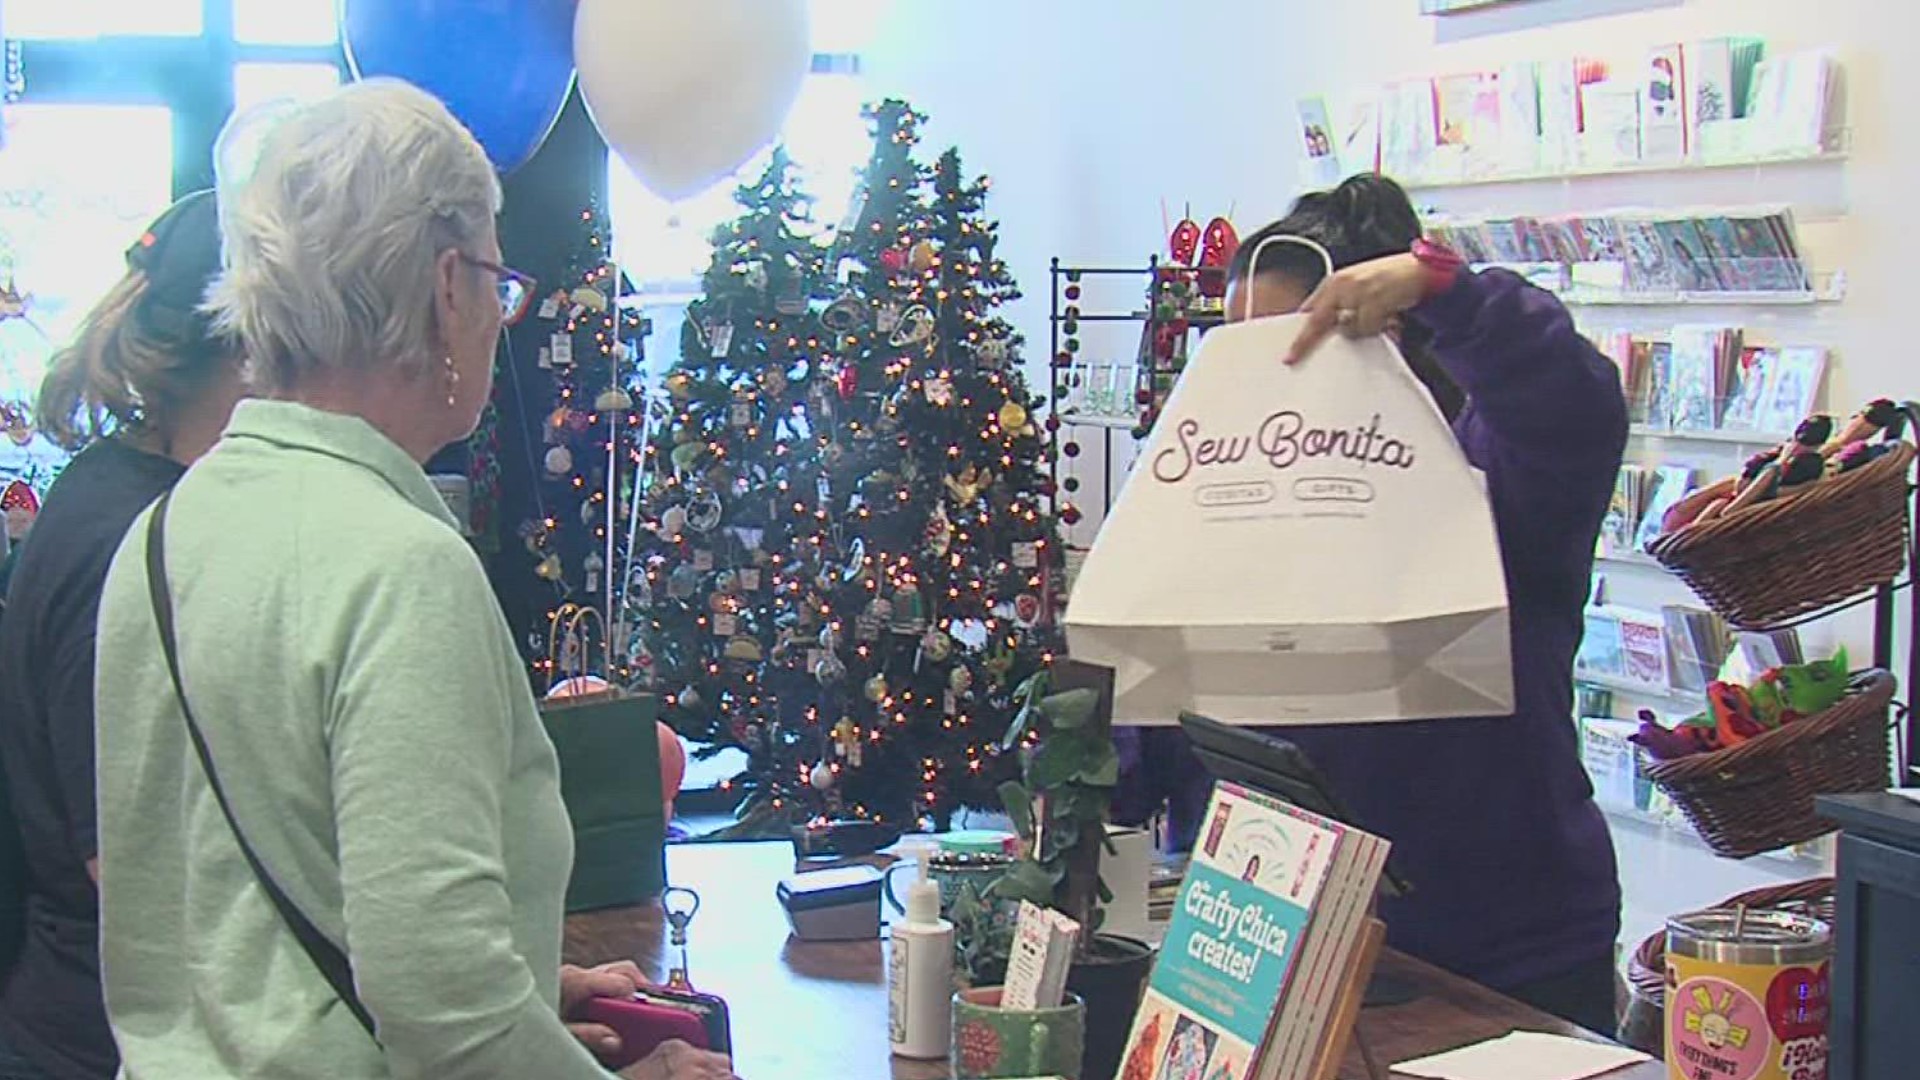 70 vendors were set up at seven different locations across the city of Corpus Christi.